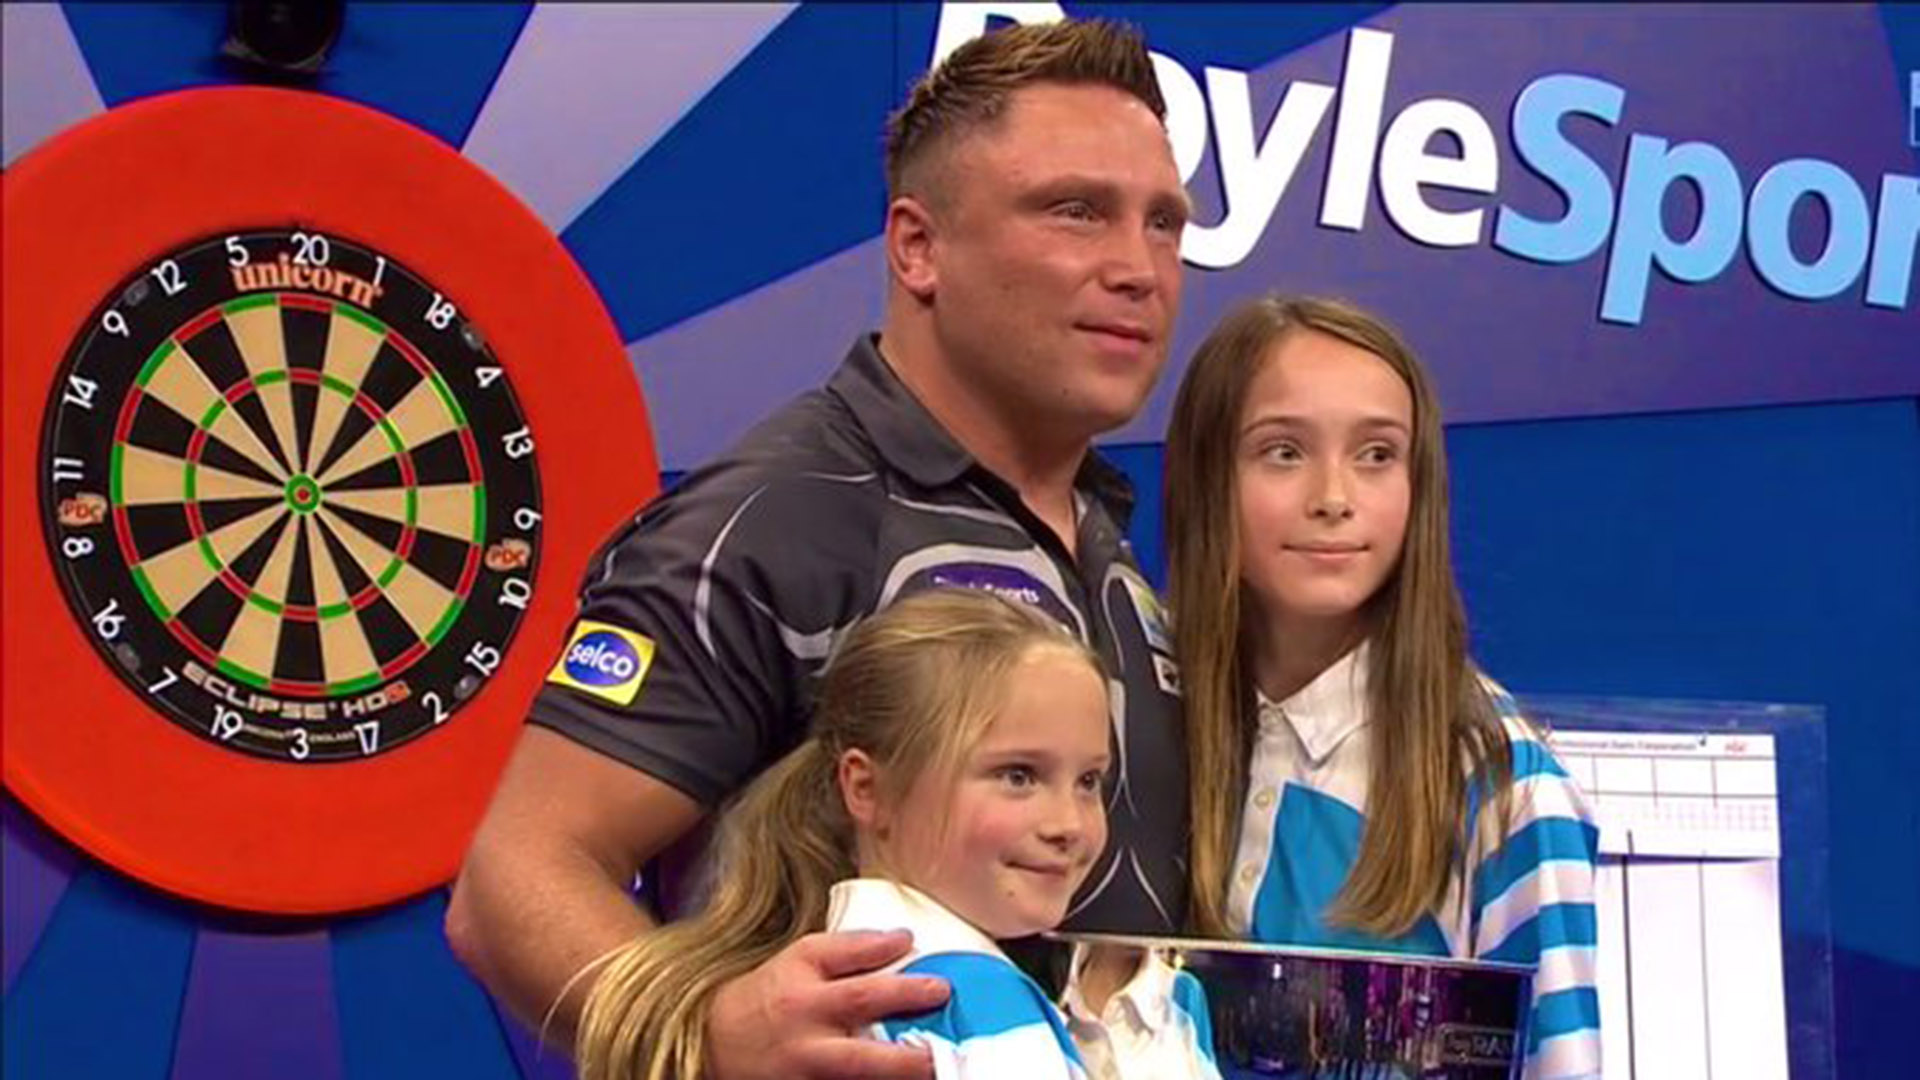 results: Gerwyn Price wins Grand Slam of Darts after beating Michael van Gerwen and Peter Wright